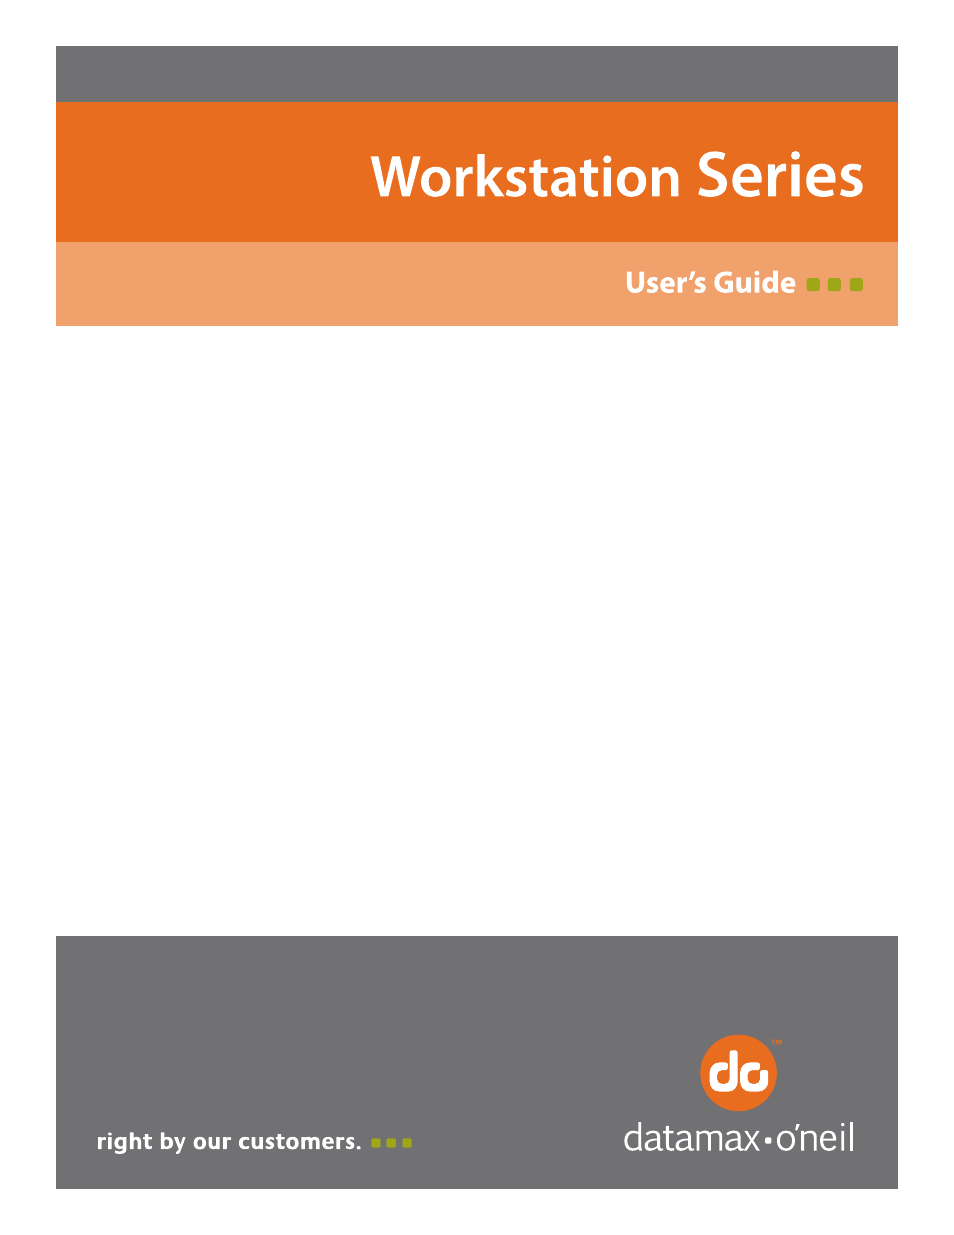 Workstation series User Guide